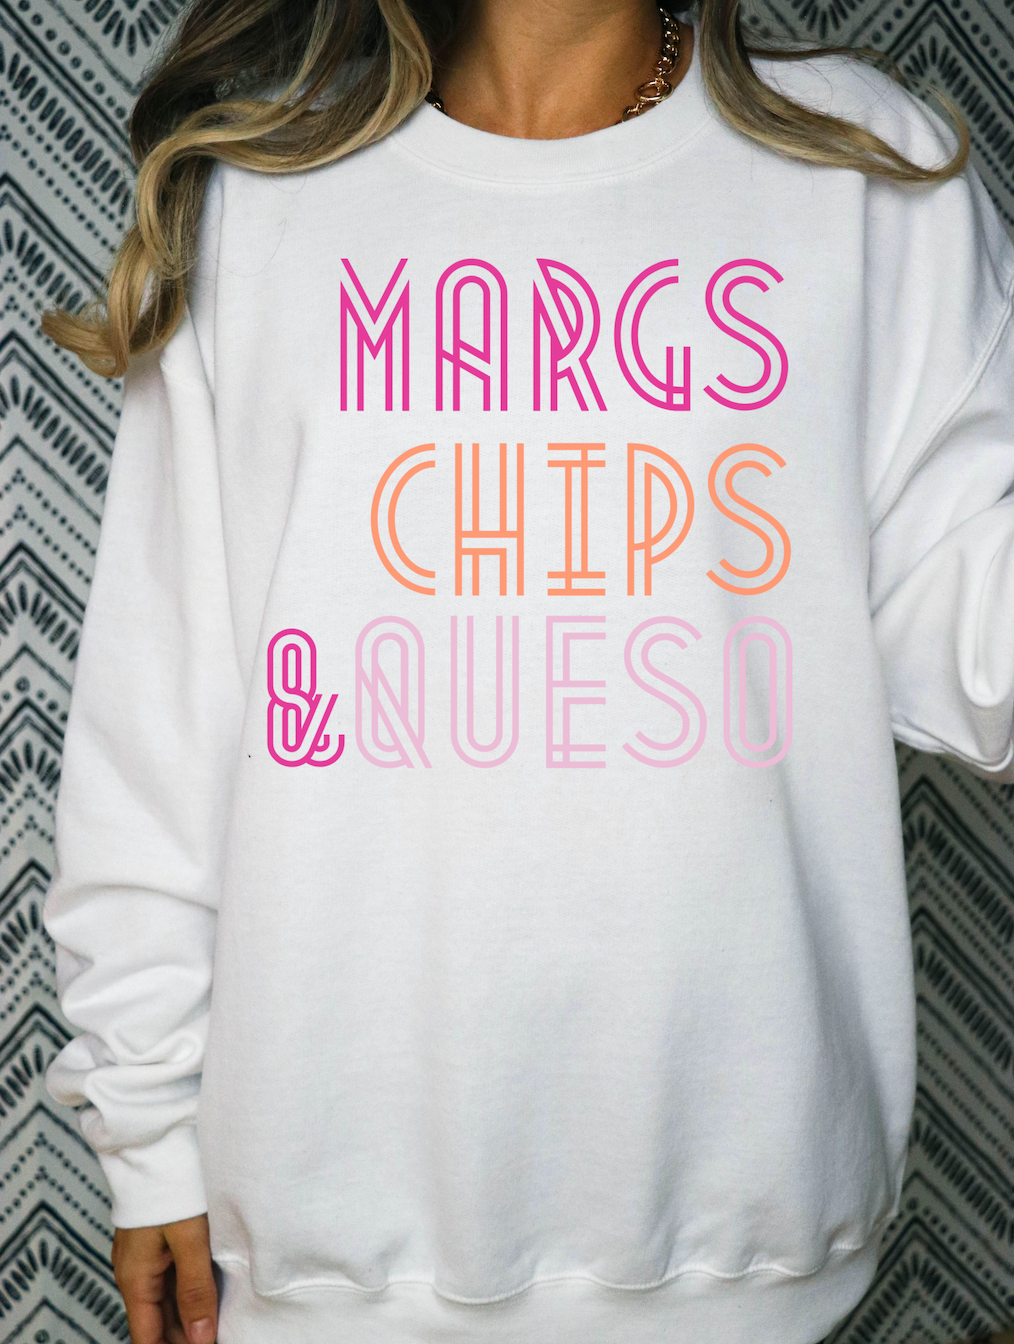 MARGS CHIPS & QUESO DTF Transfer